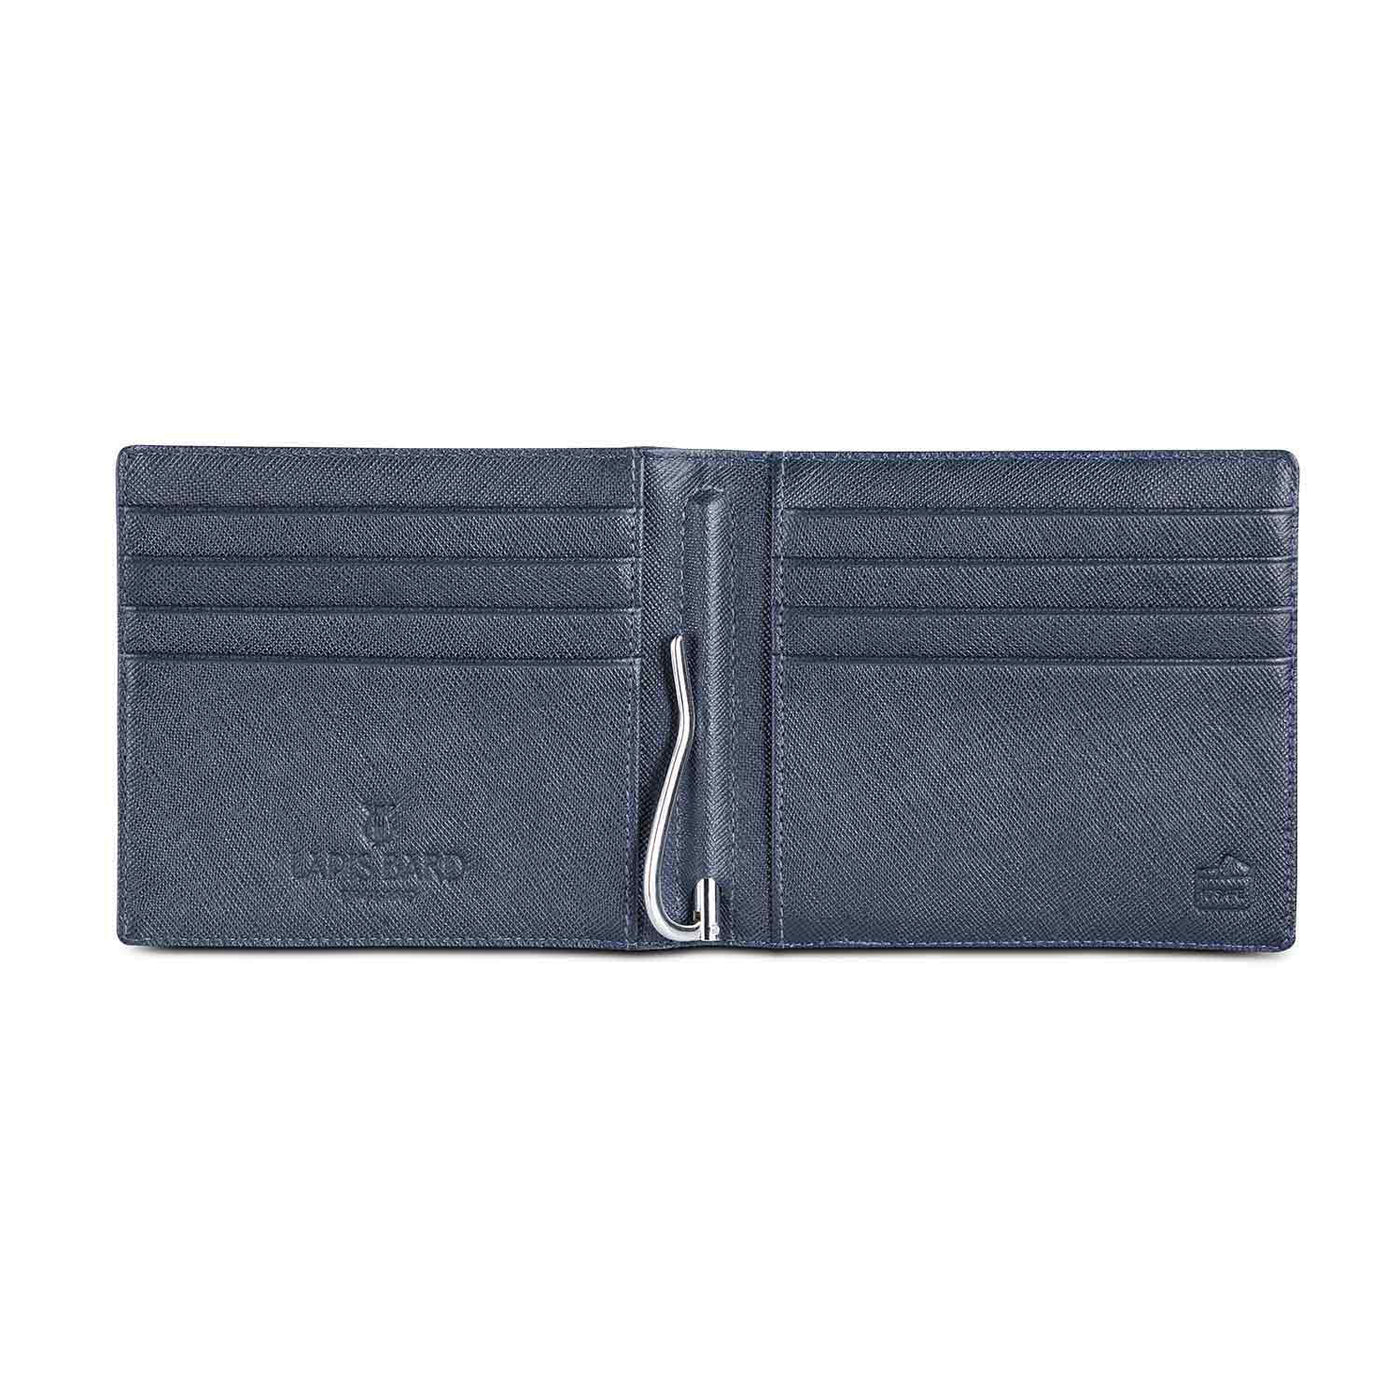 Lapis Bard Stanford Money Clip Evening 8cc Wallet with Additional Sleeve - Blue 2